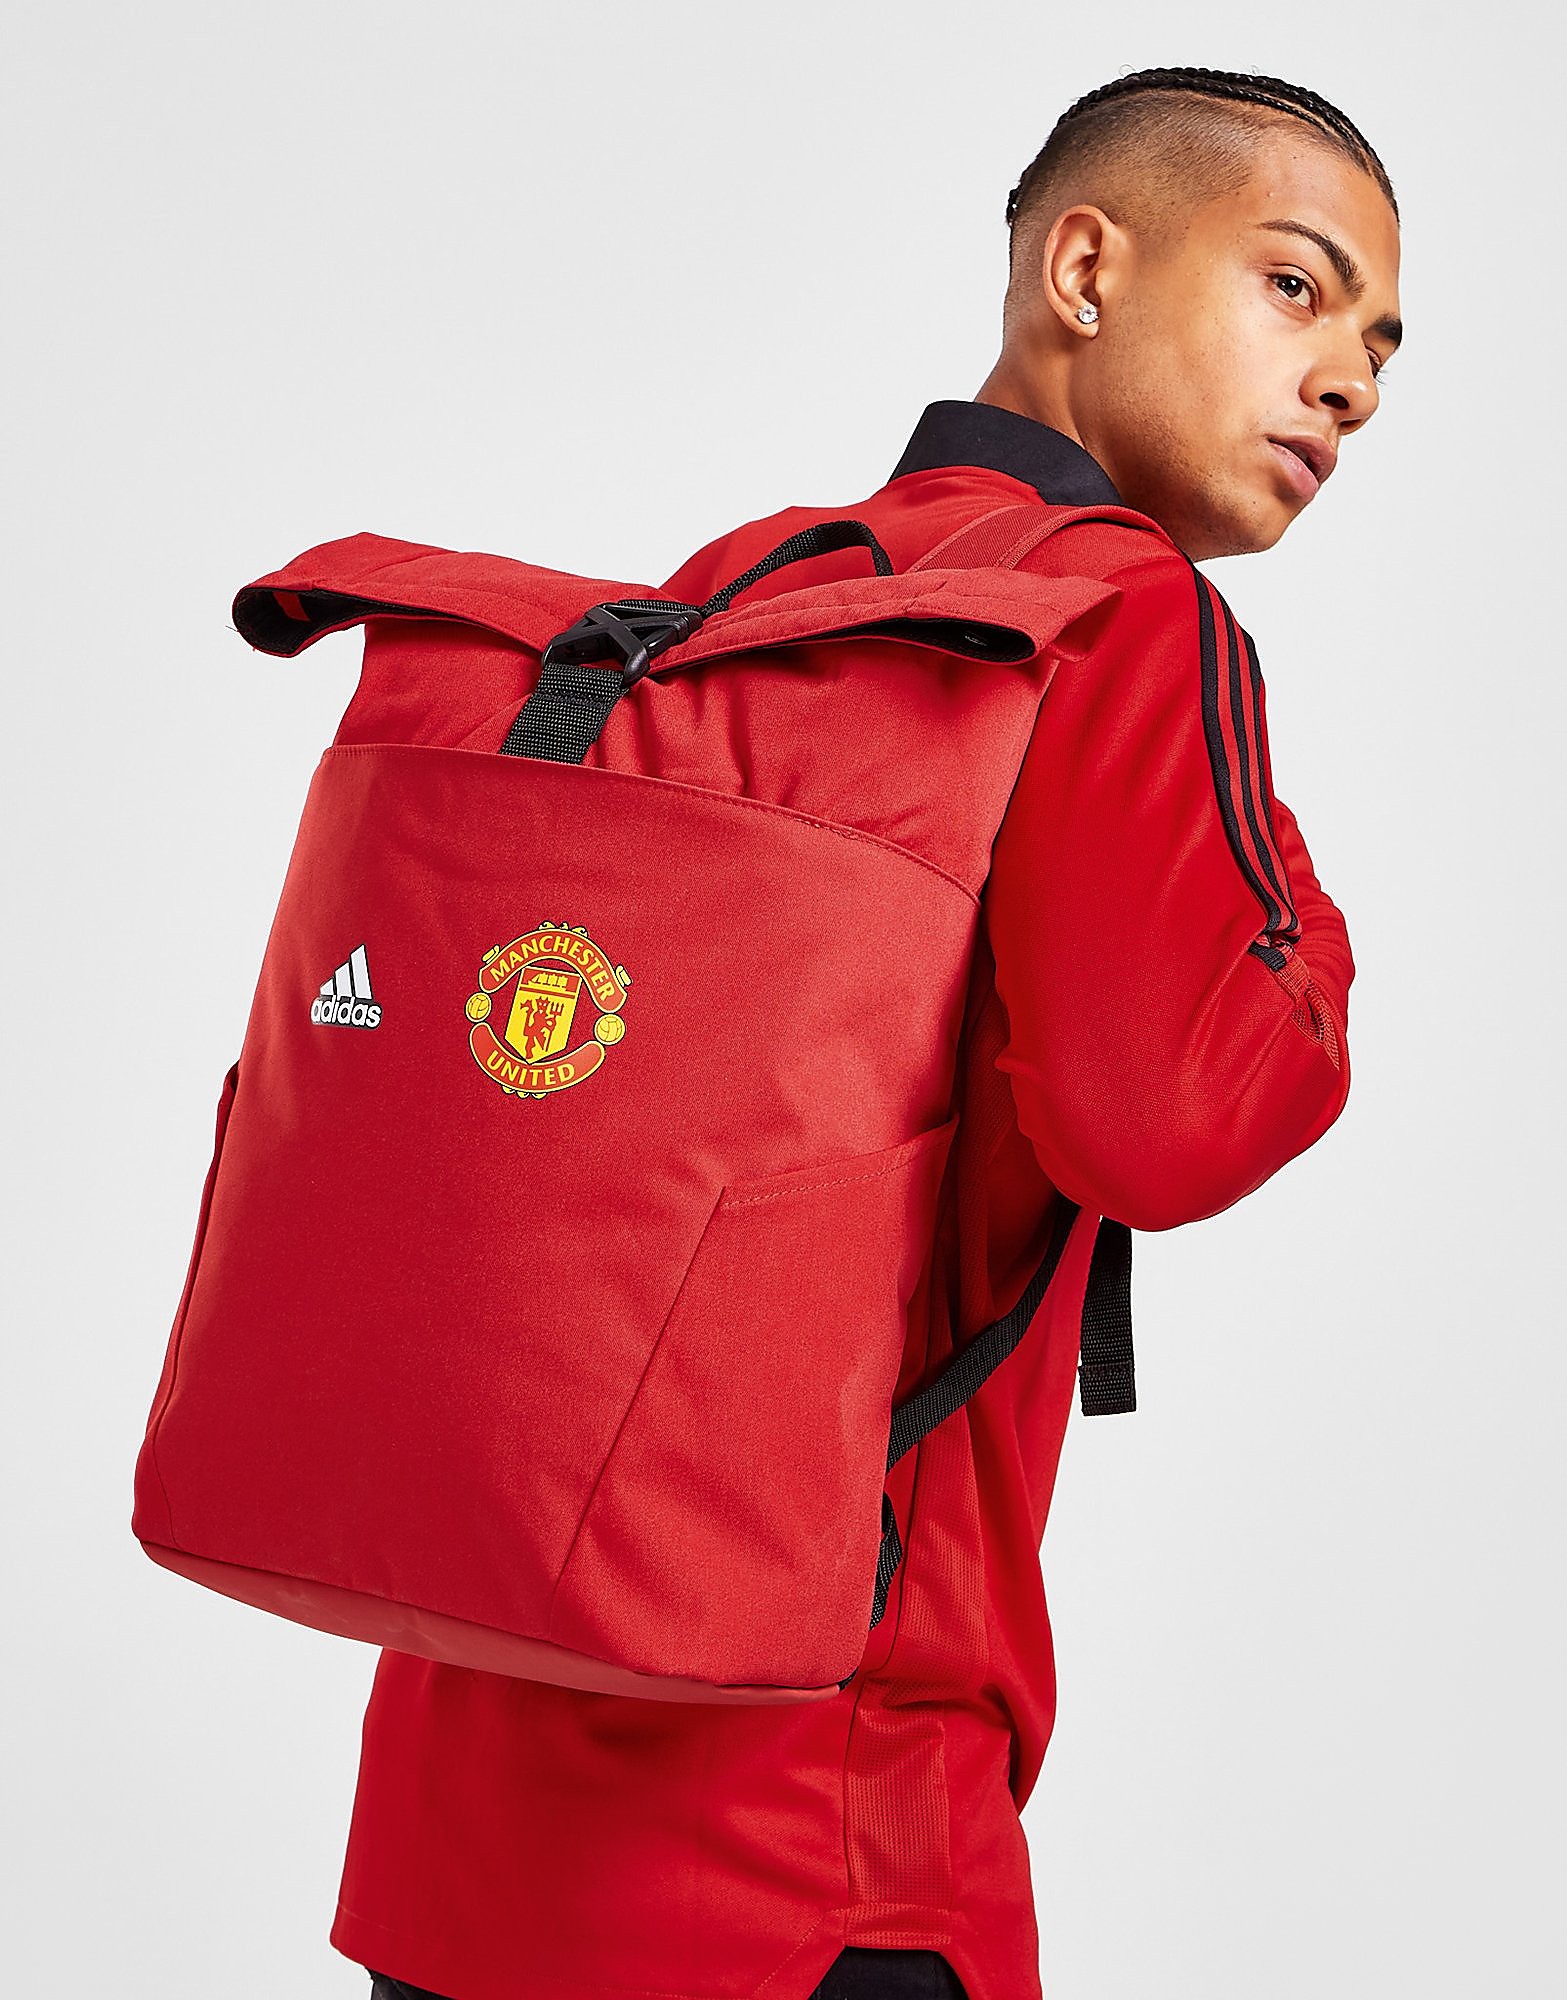 

adidas Manchester United FC Backpack - Real Red / Black / White - Womens, Real Red / Black / White